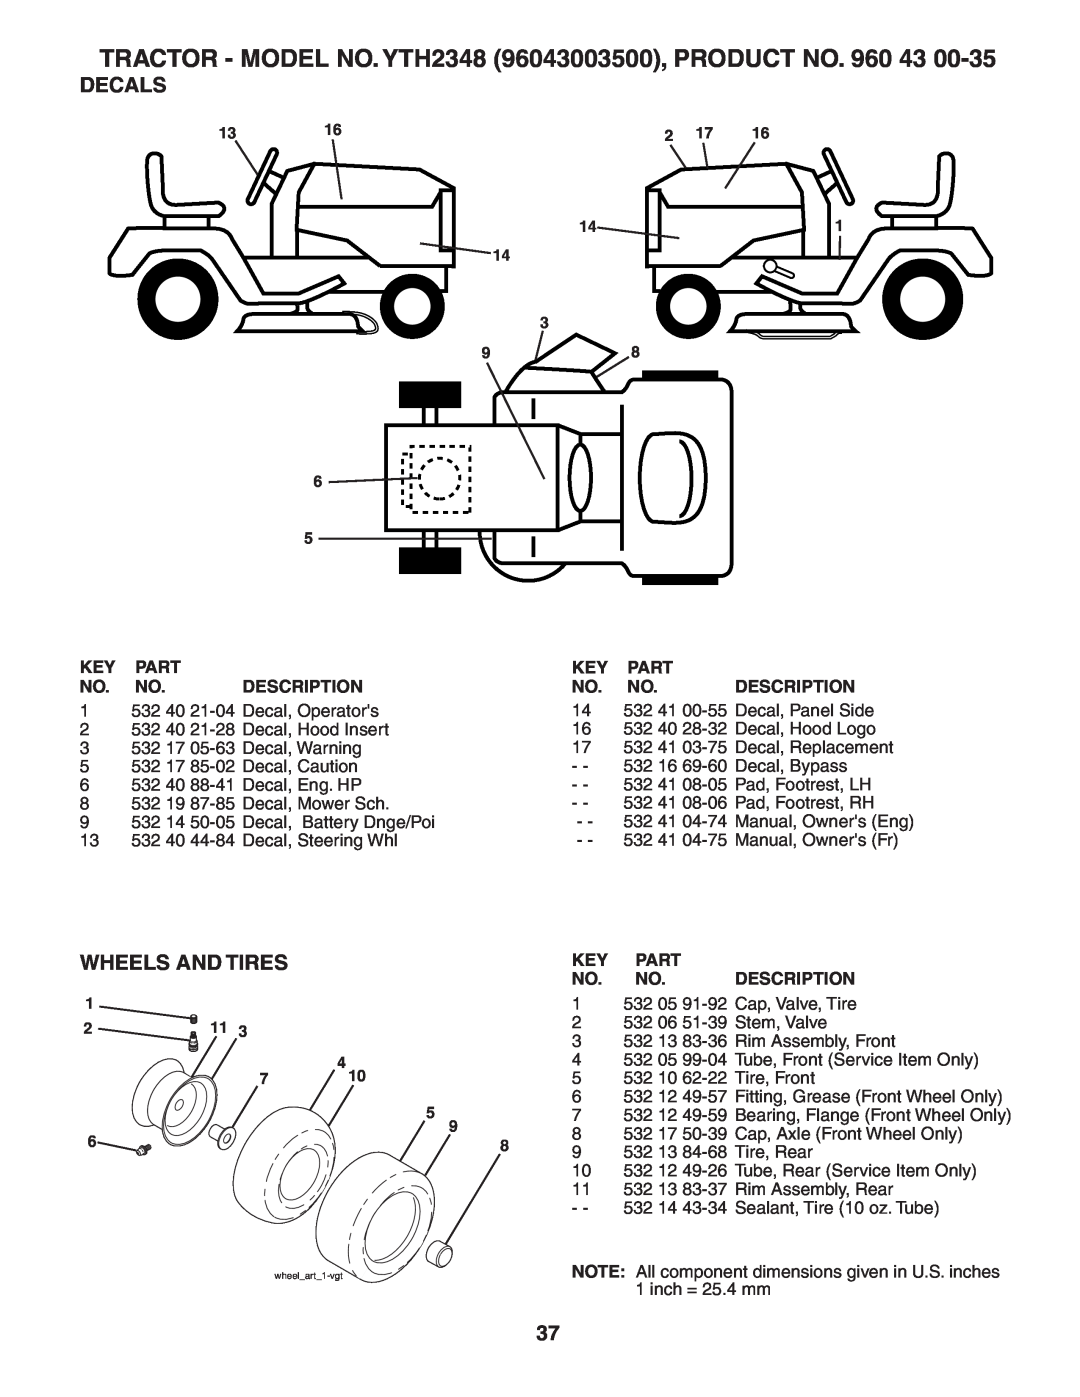 Husqvarna YTH2348 owner manual Decals, Wheels And Tires, Part, Description 